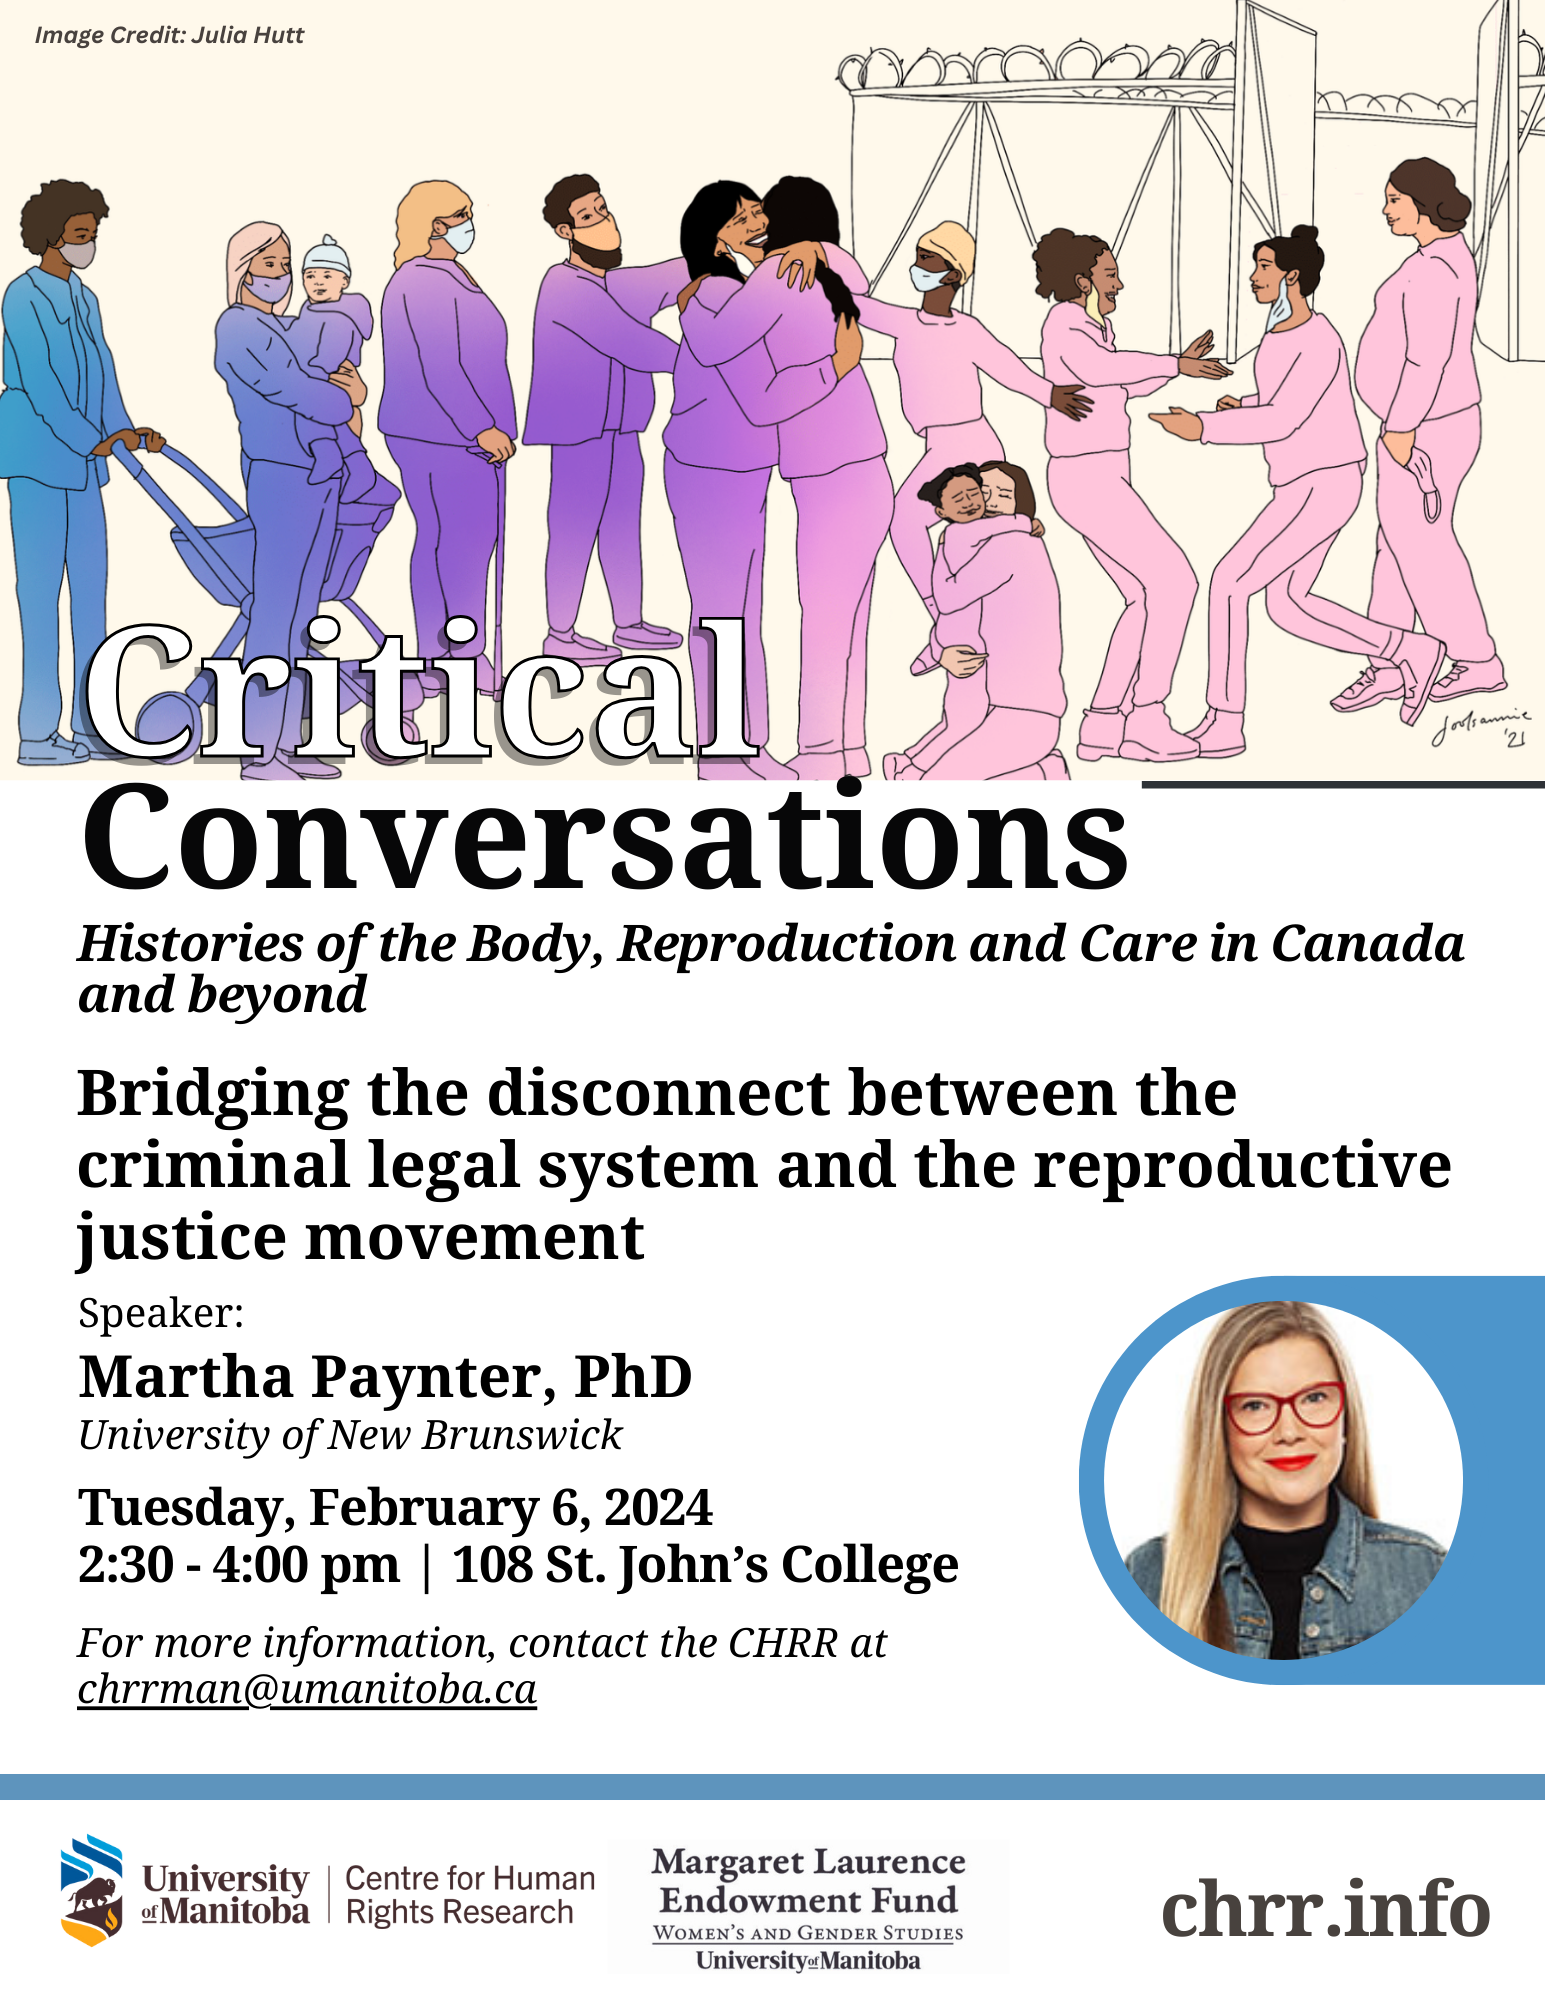 Poster for upcoming event with Martha Paynter. At the top of the poster is an image by Julia Hutt, with artwork of women and children outside prison gates. The women are laughing and hugging, and holding their children.